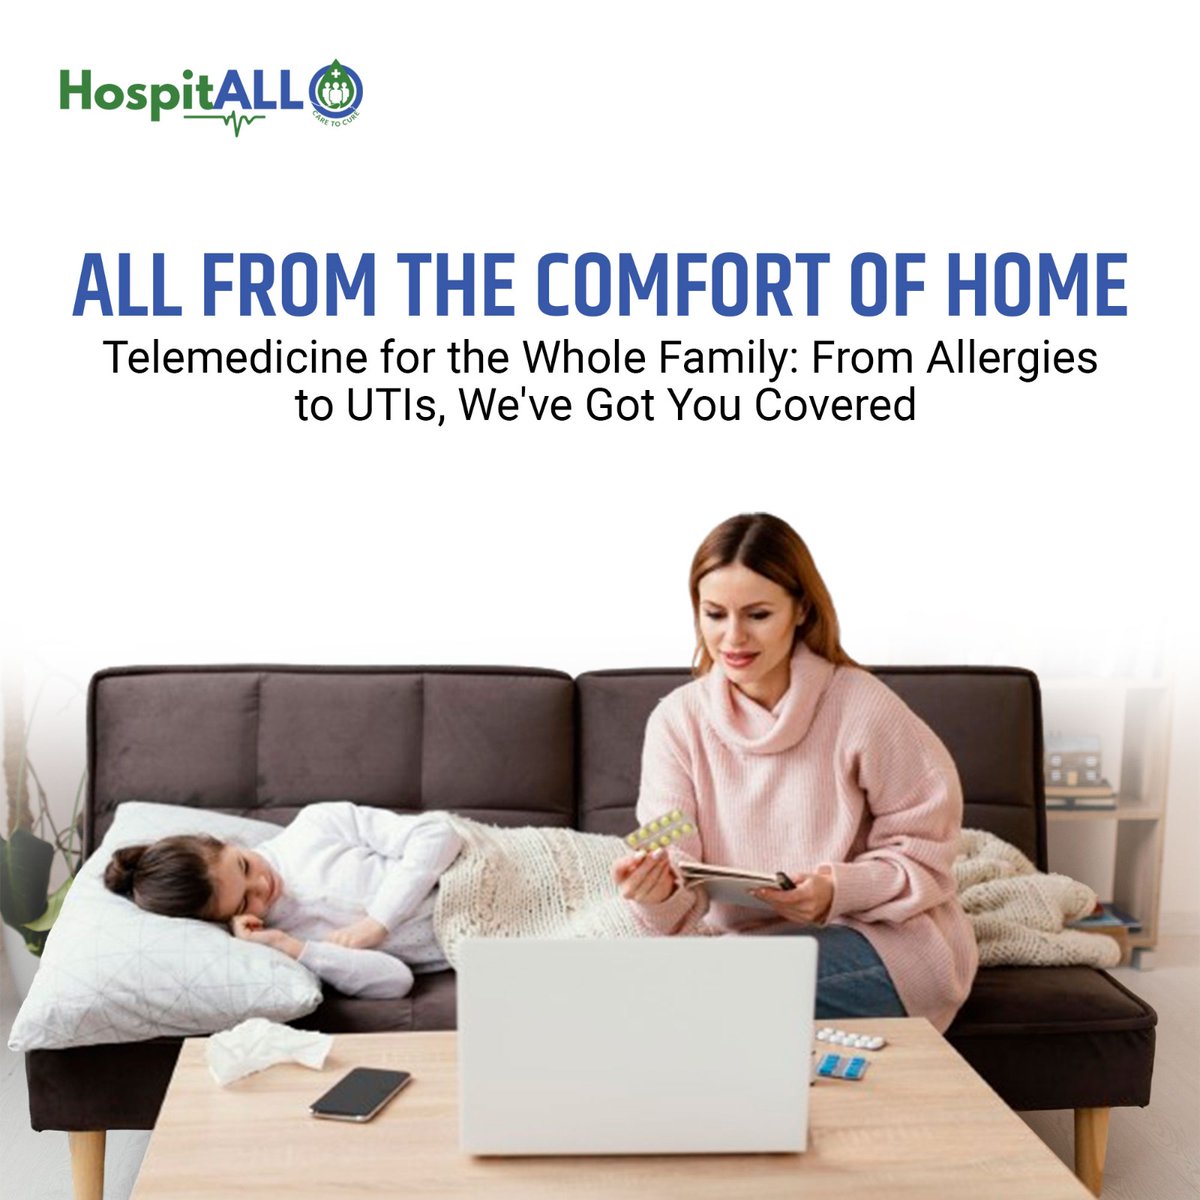 Healthcare at your fingertips, without stepping out the door. Your family's wellness, simplified online. 🏠💻 

#Healthcare #TelemedicineEase #Wellness #Telehospital #HospitALL